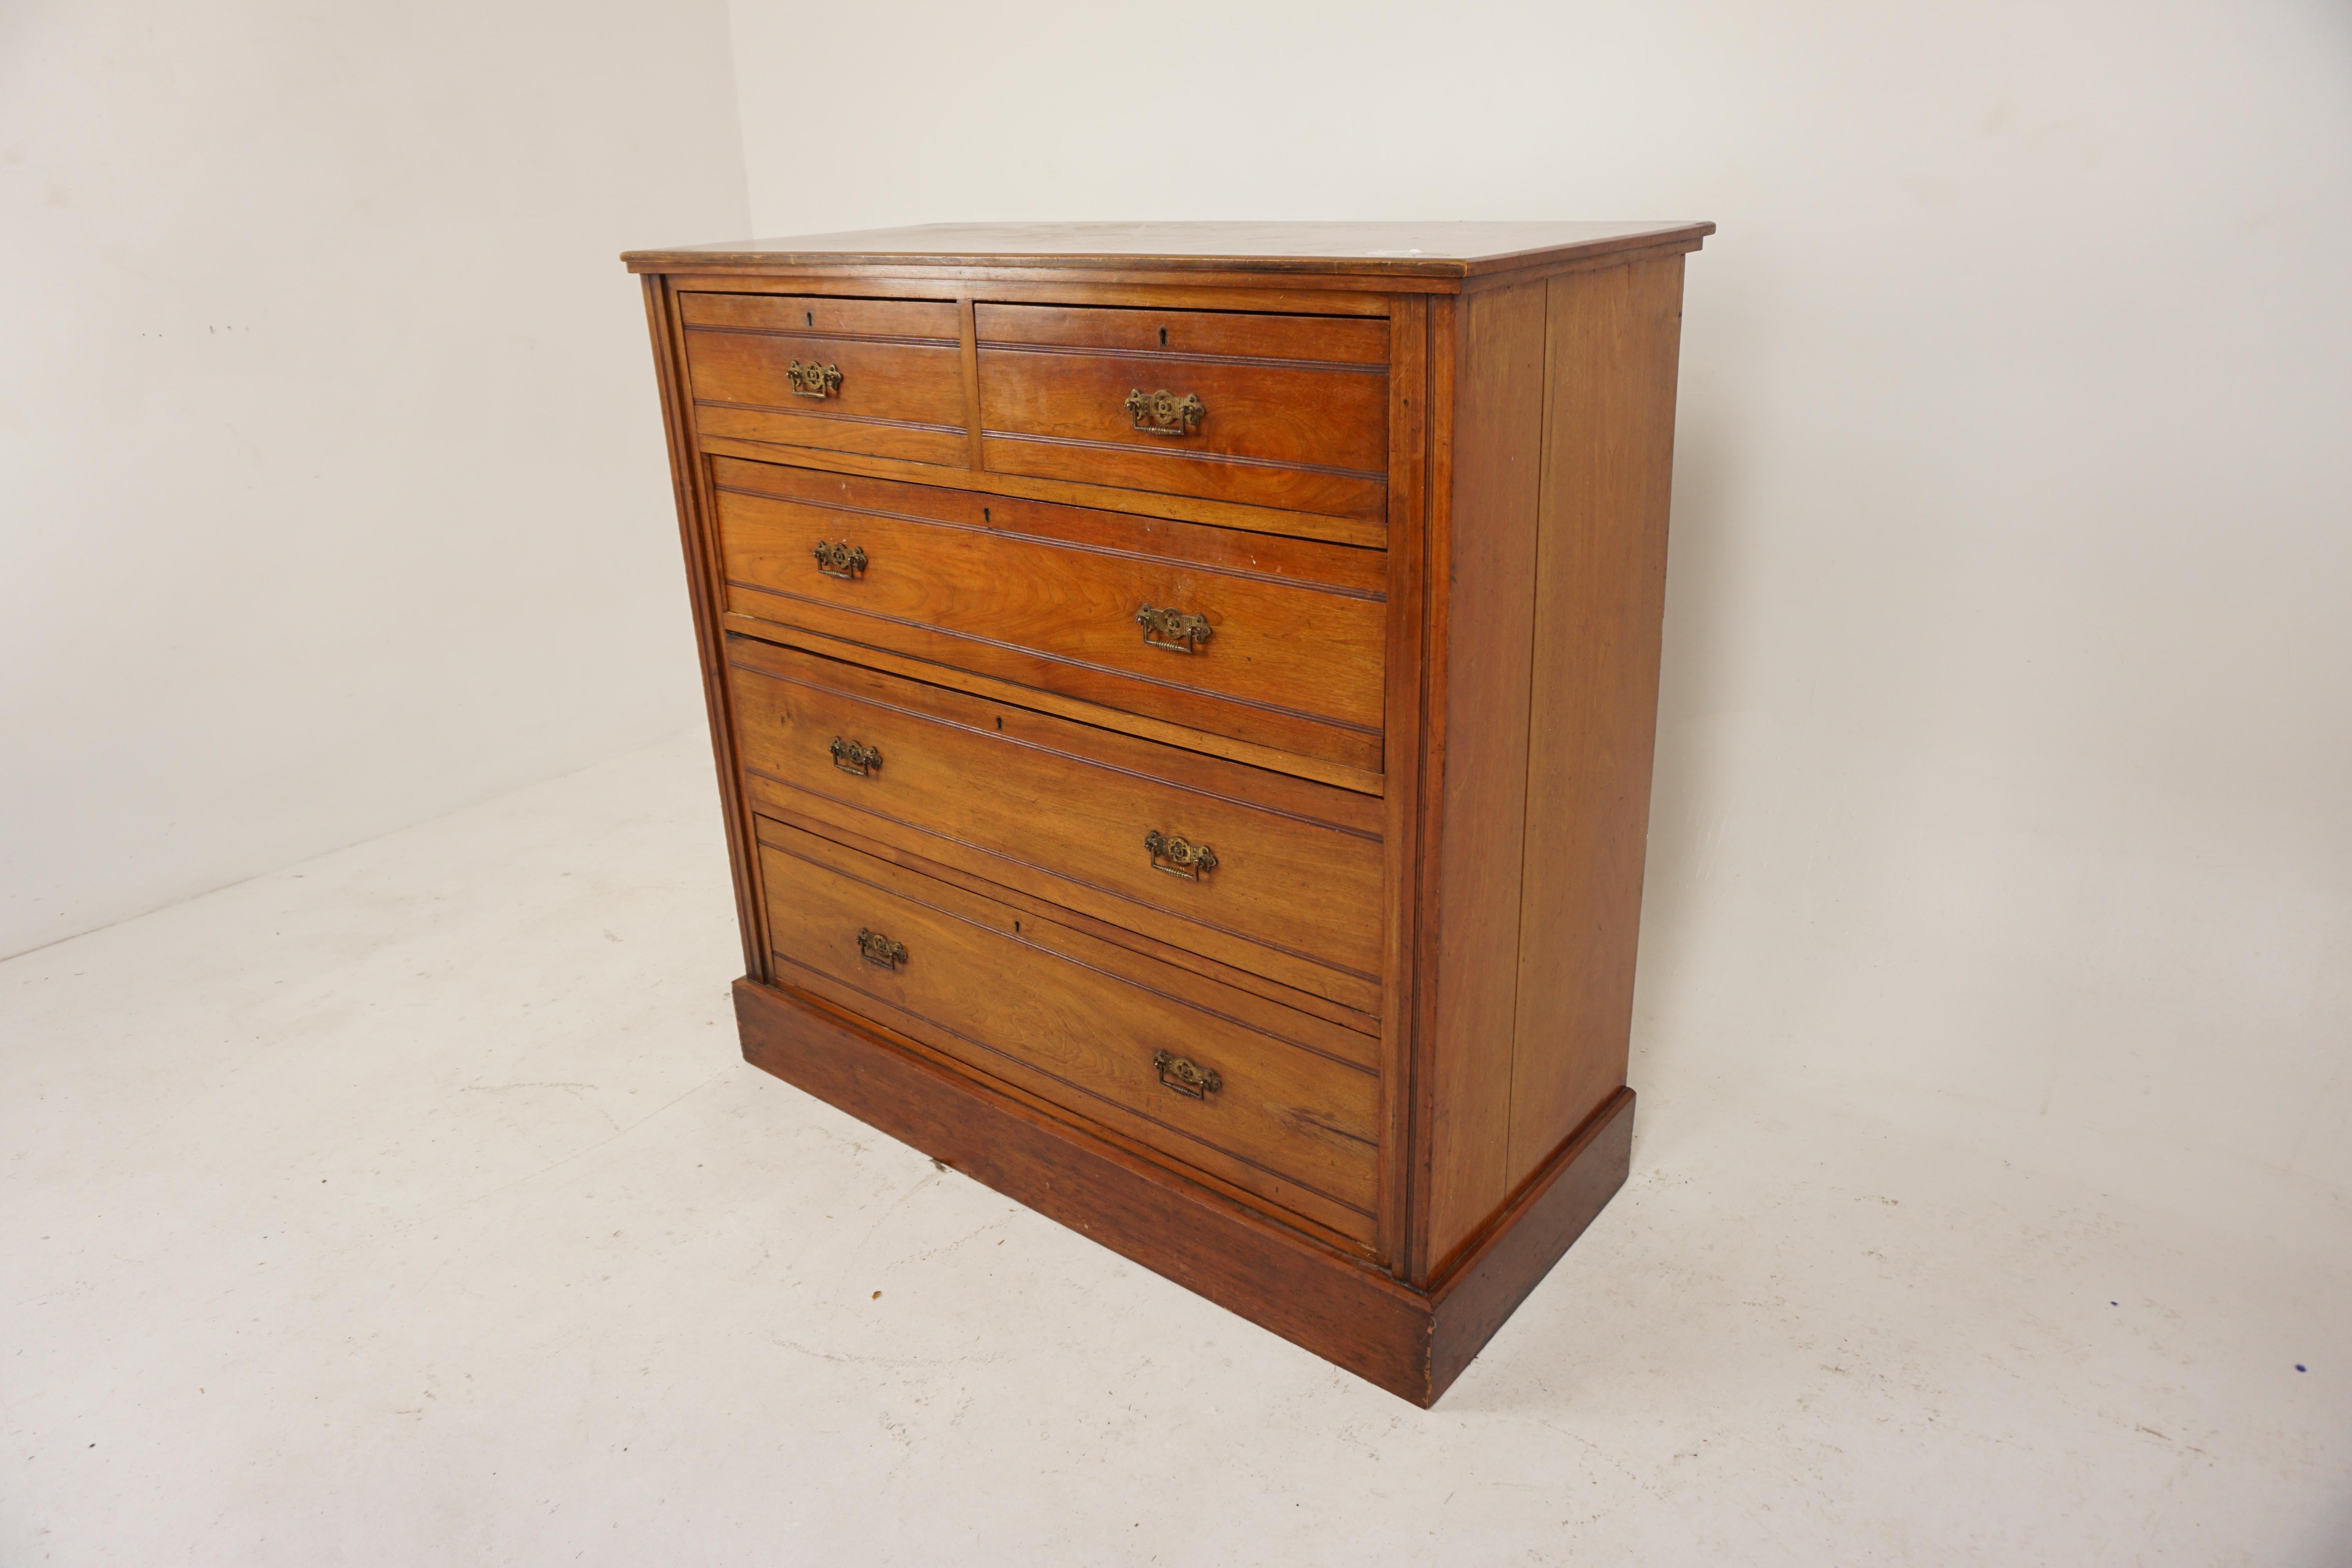 Victorian Walnut Chest of Drawers, Dresser, Scotland 1890, H683

Scotland 1890
Solid Walnut
Original finish
Rectangular moulded top
Two short drawers over three long drawers
All original brass pulls and brass escutcheons
It stands on a plinth